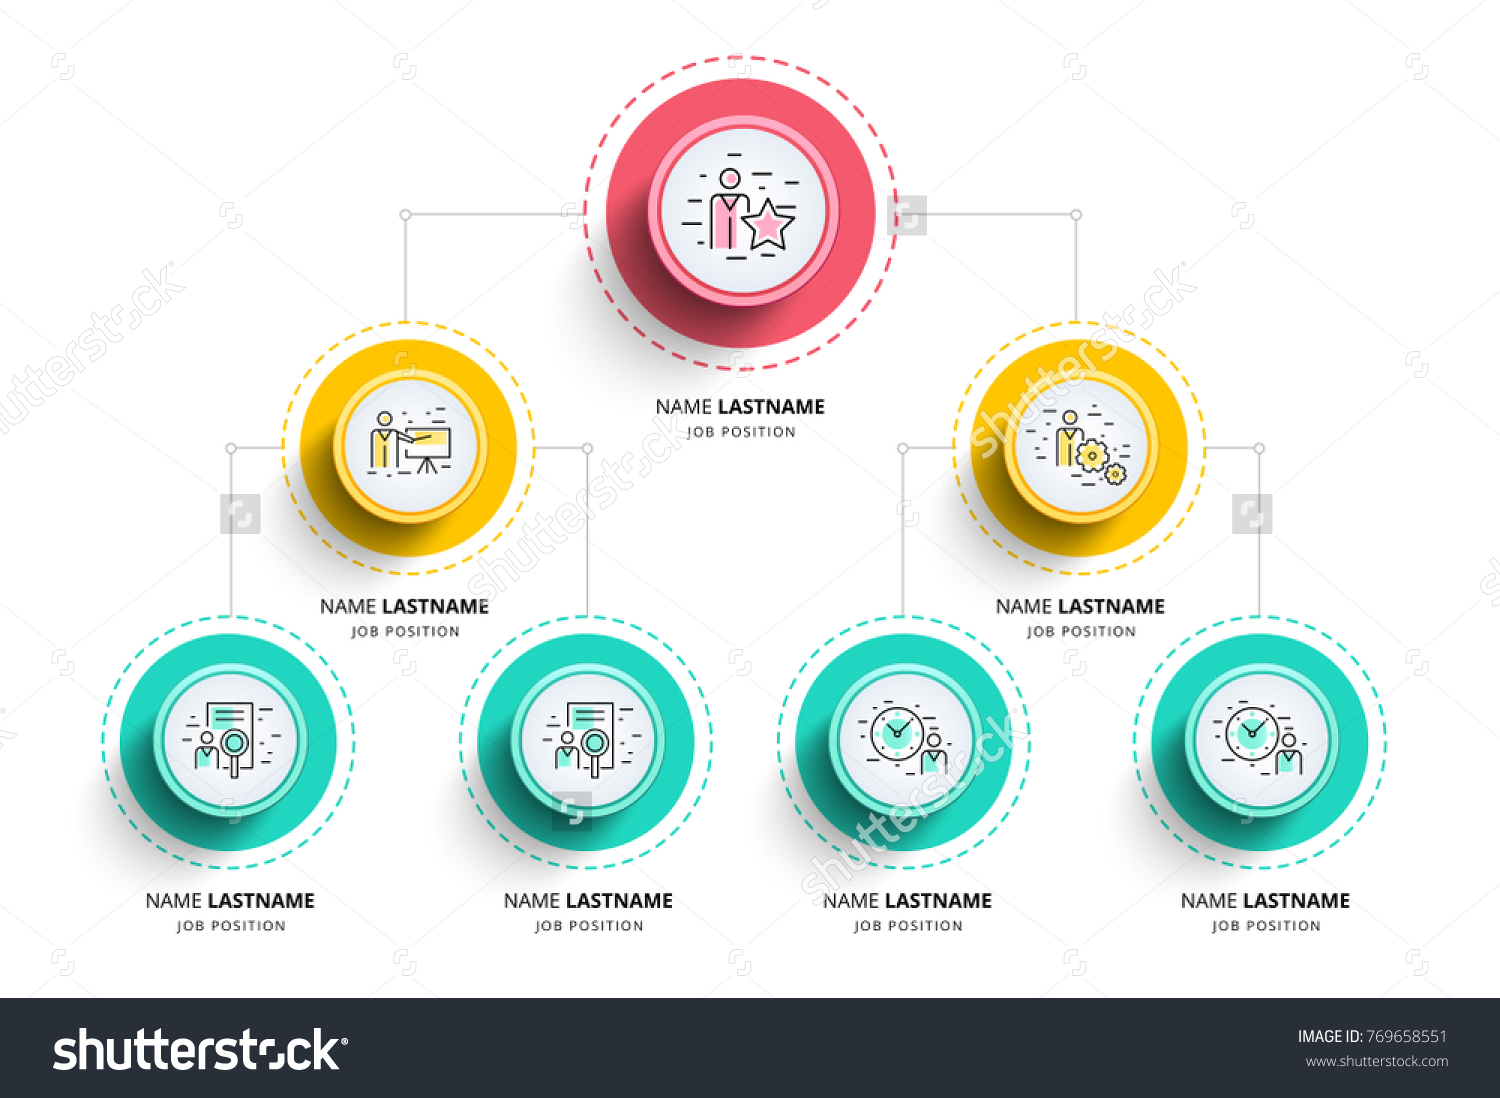 Business hierarchy organogram chart infographics. Corporate organizational structure graphic elements. Company organization branches template. Modern vector info graphic tree layout design. #769658551